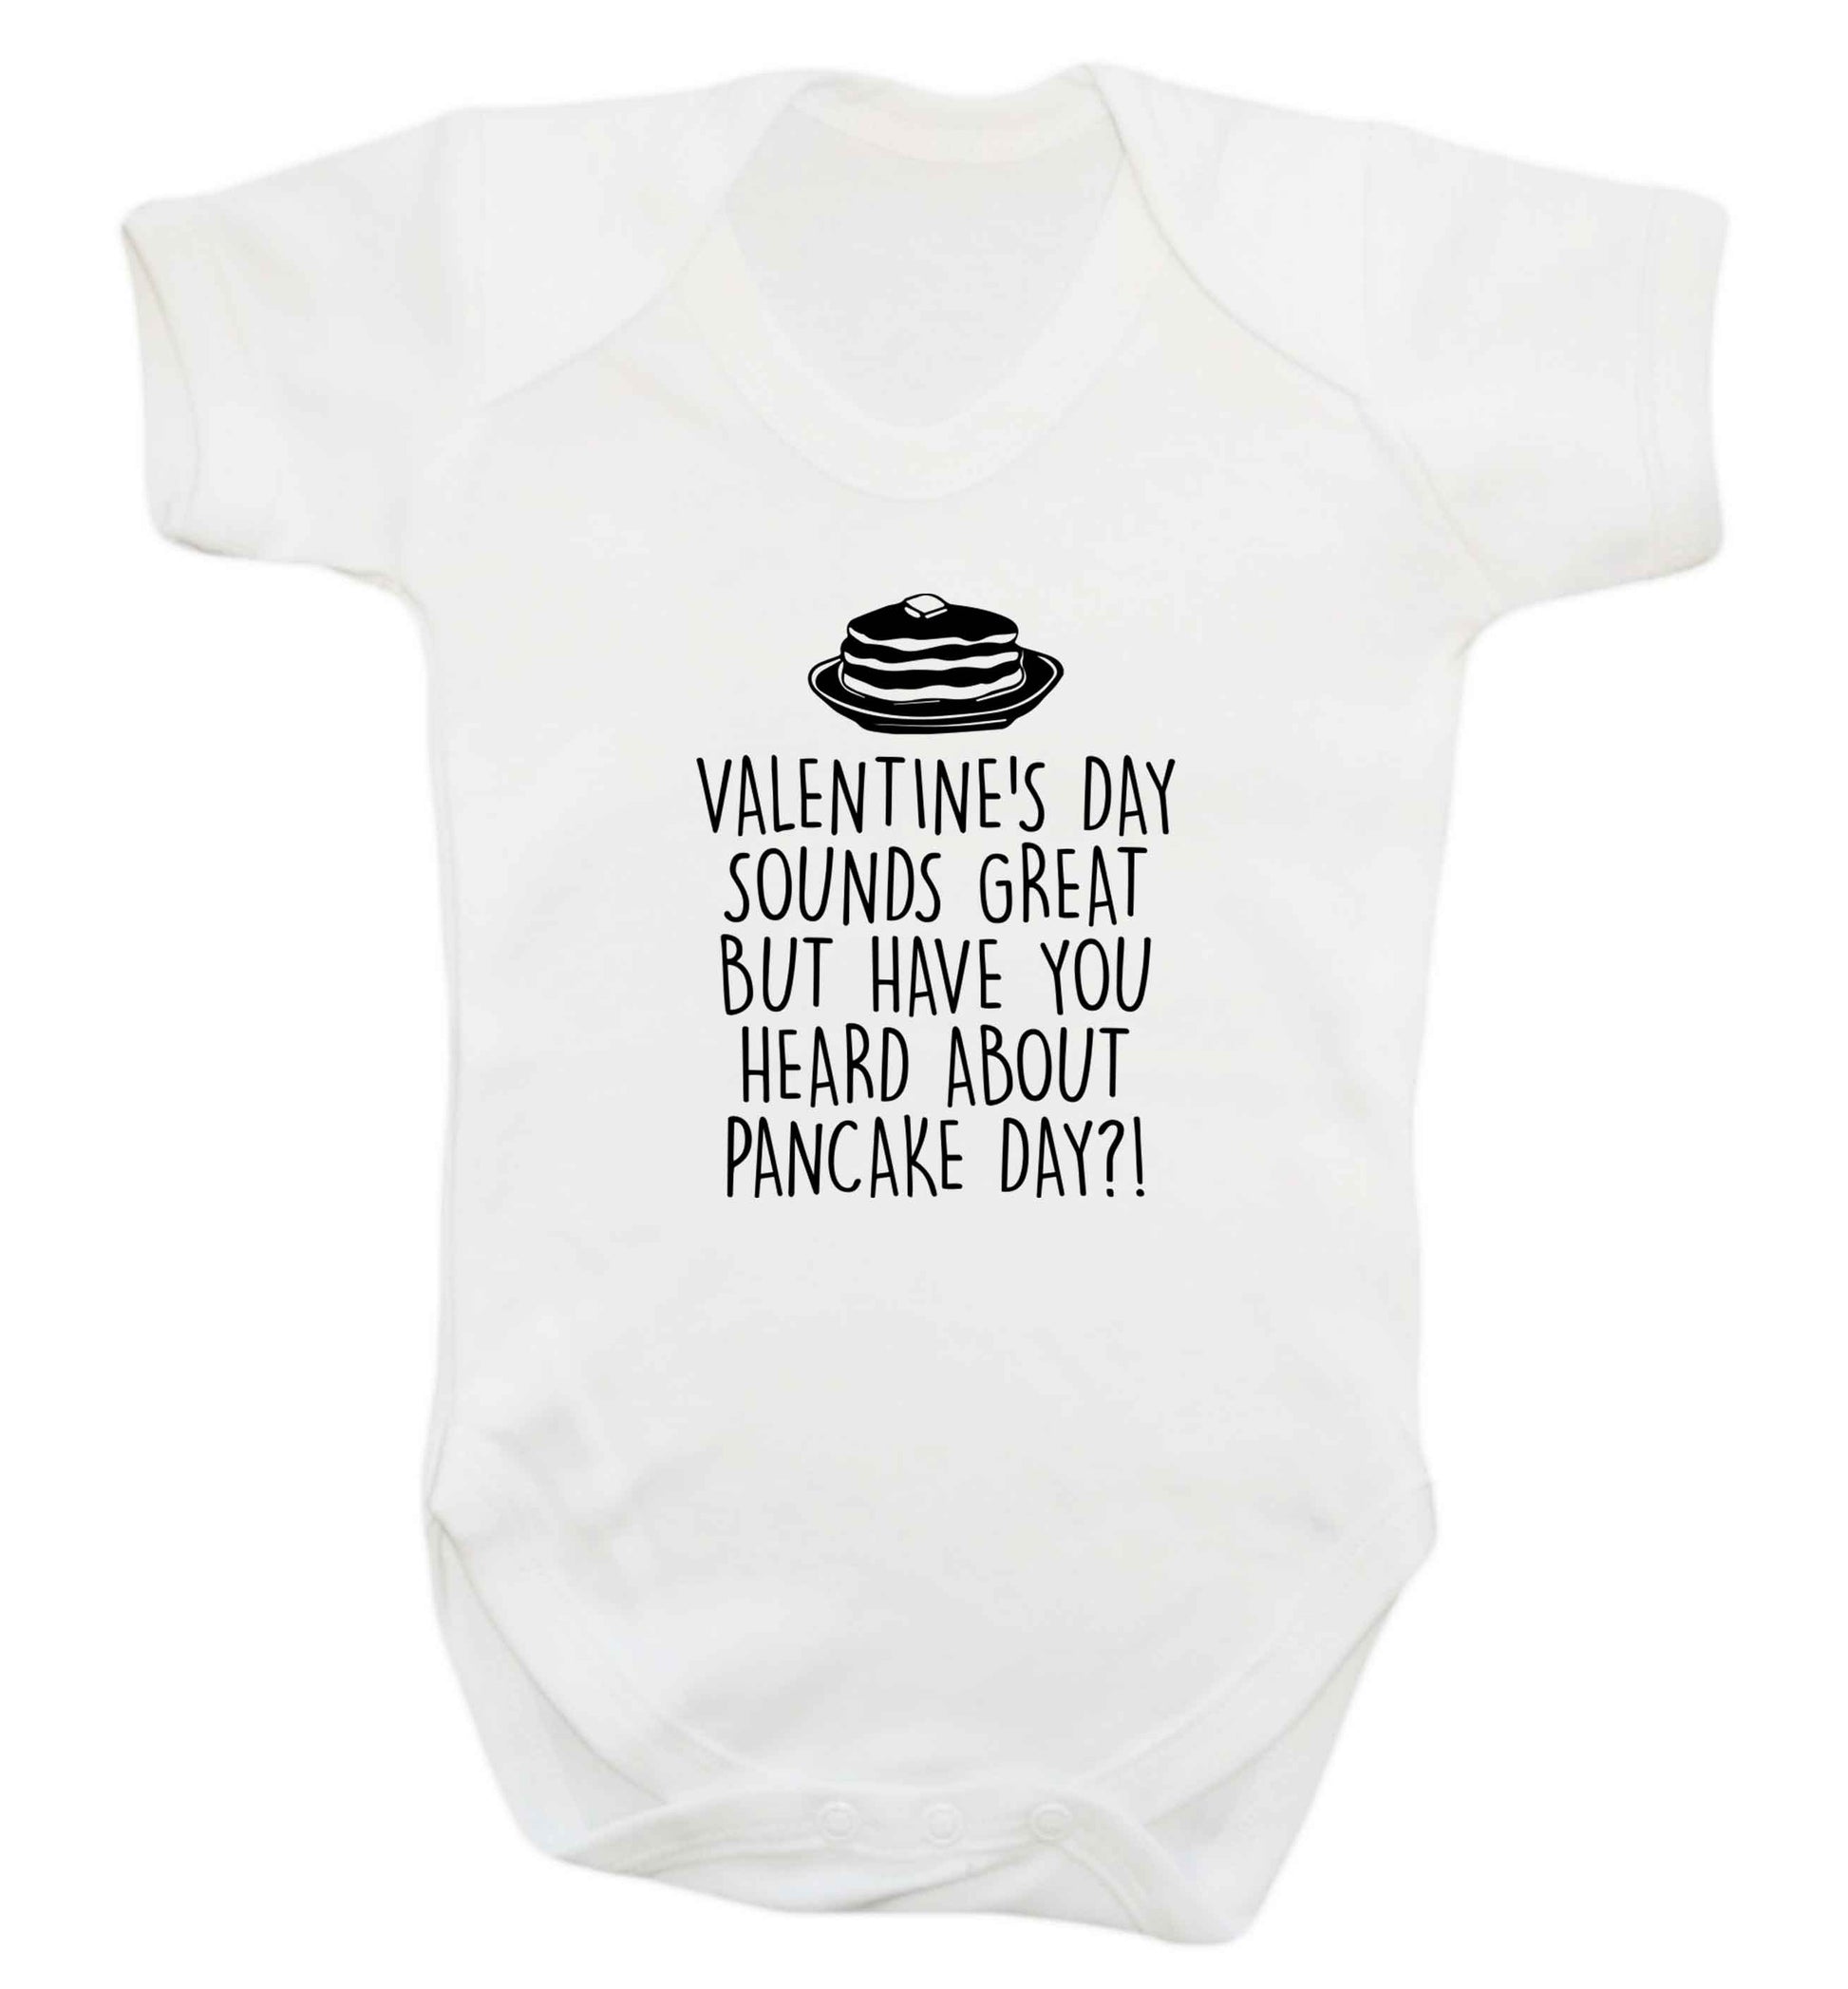 Valentine's day sounds great but have you heard about pancake day?! baby vest white 18-24 months